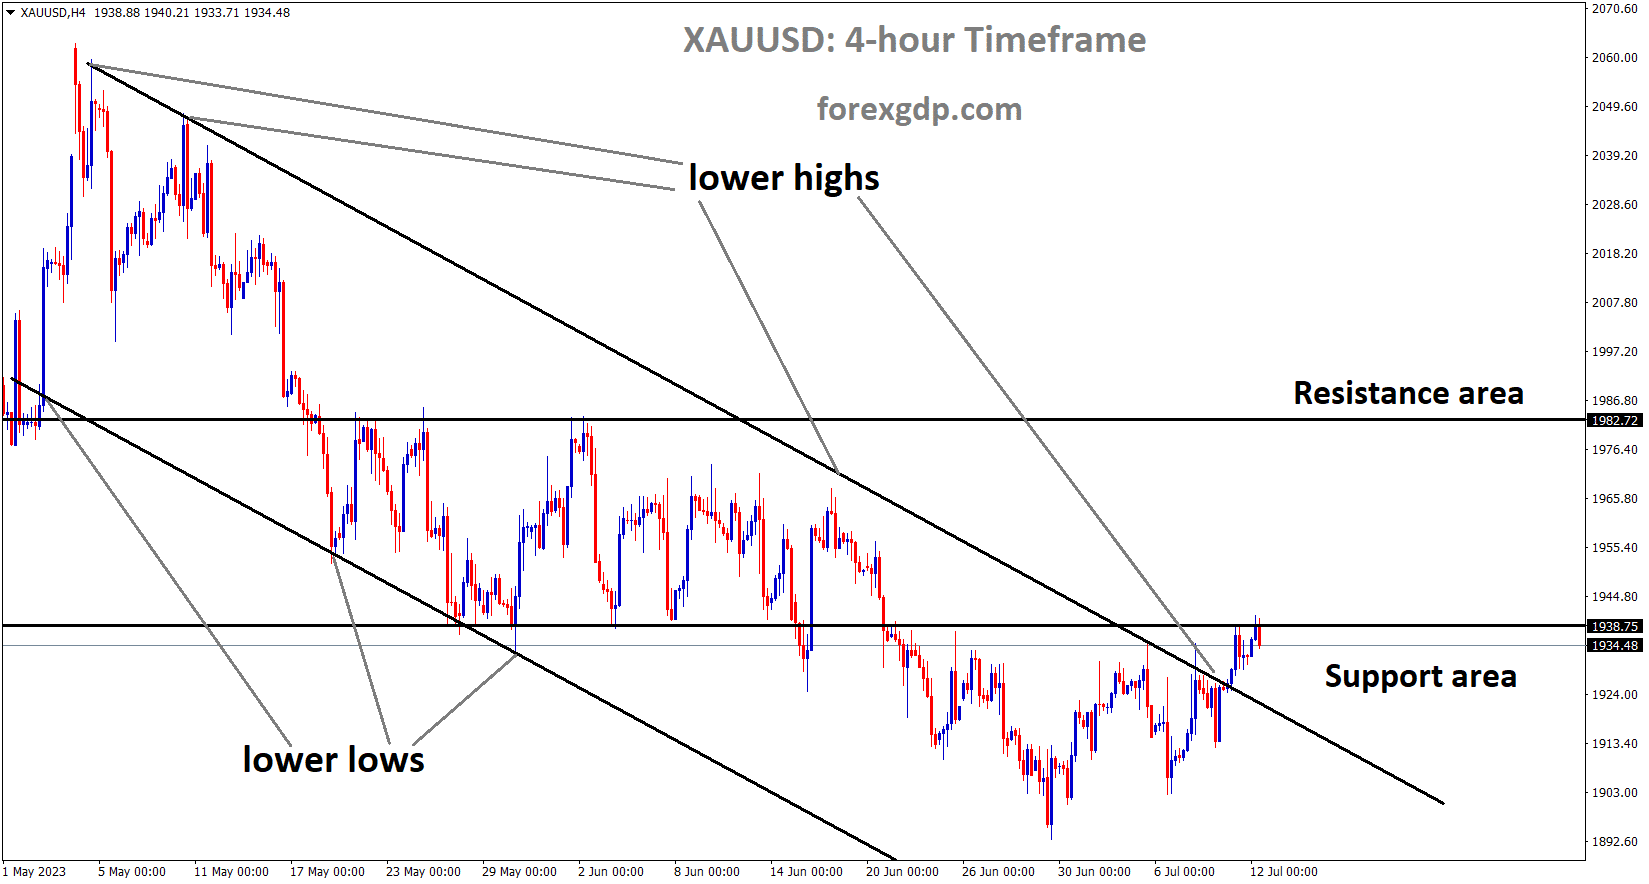 XAUUSD Gold price is moving in the Descending channel and the market has reached the lower high area of the channel 1